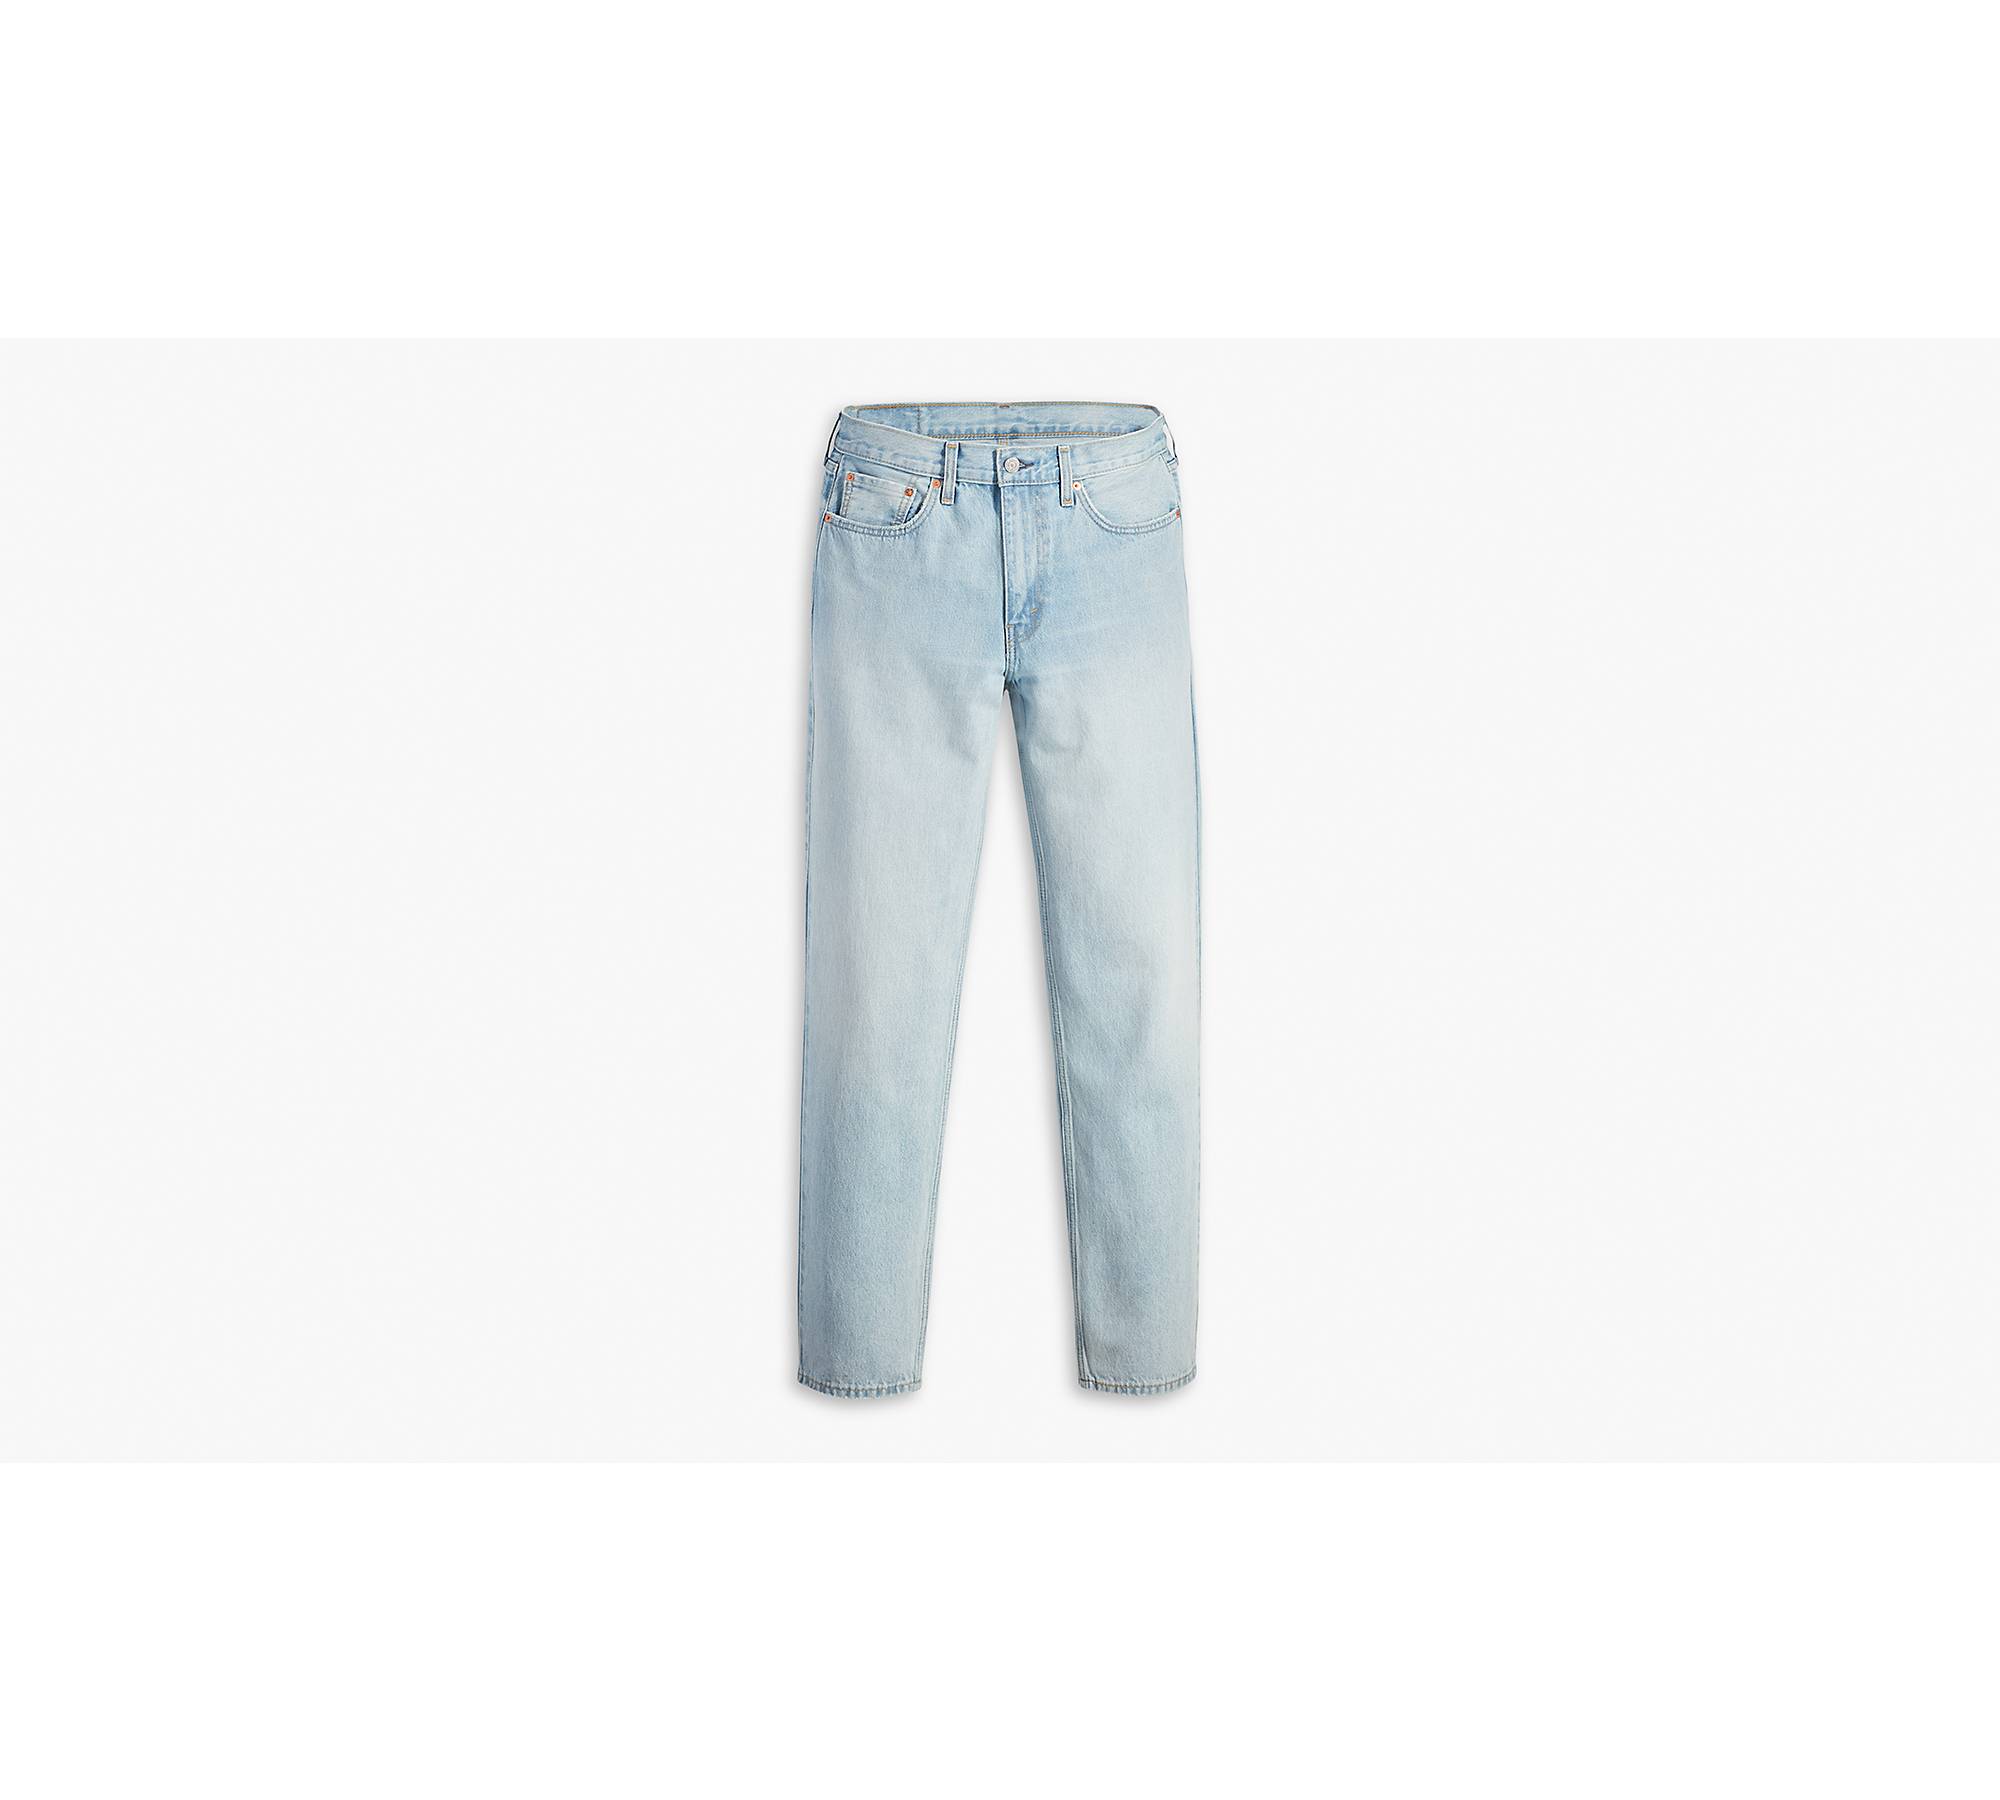 550™ Relaxed Fit Men's Jeans - Light Wash | Levi's® CA